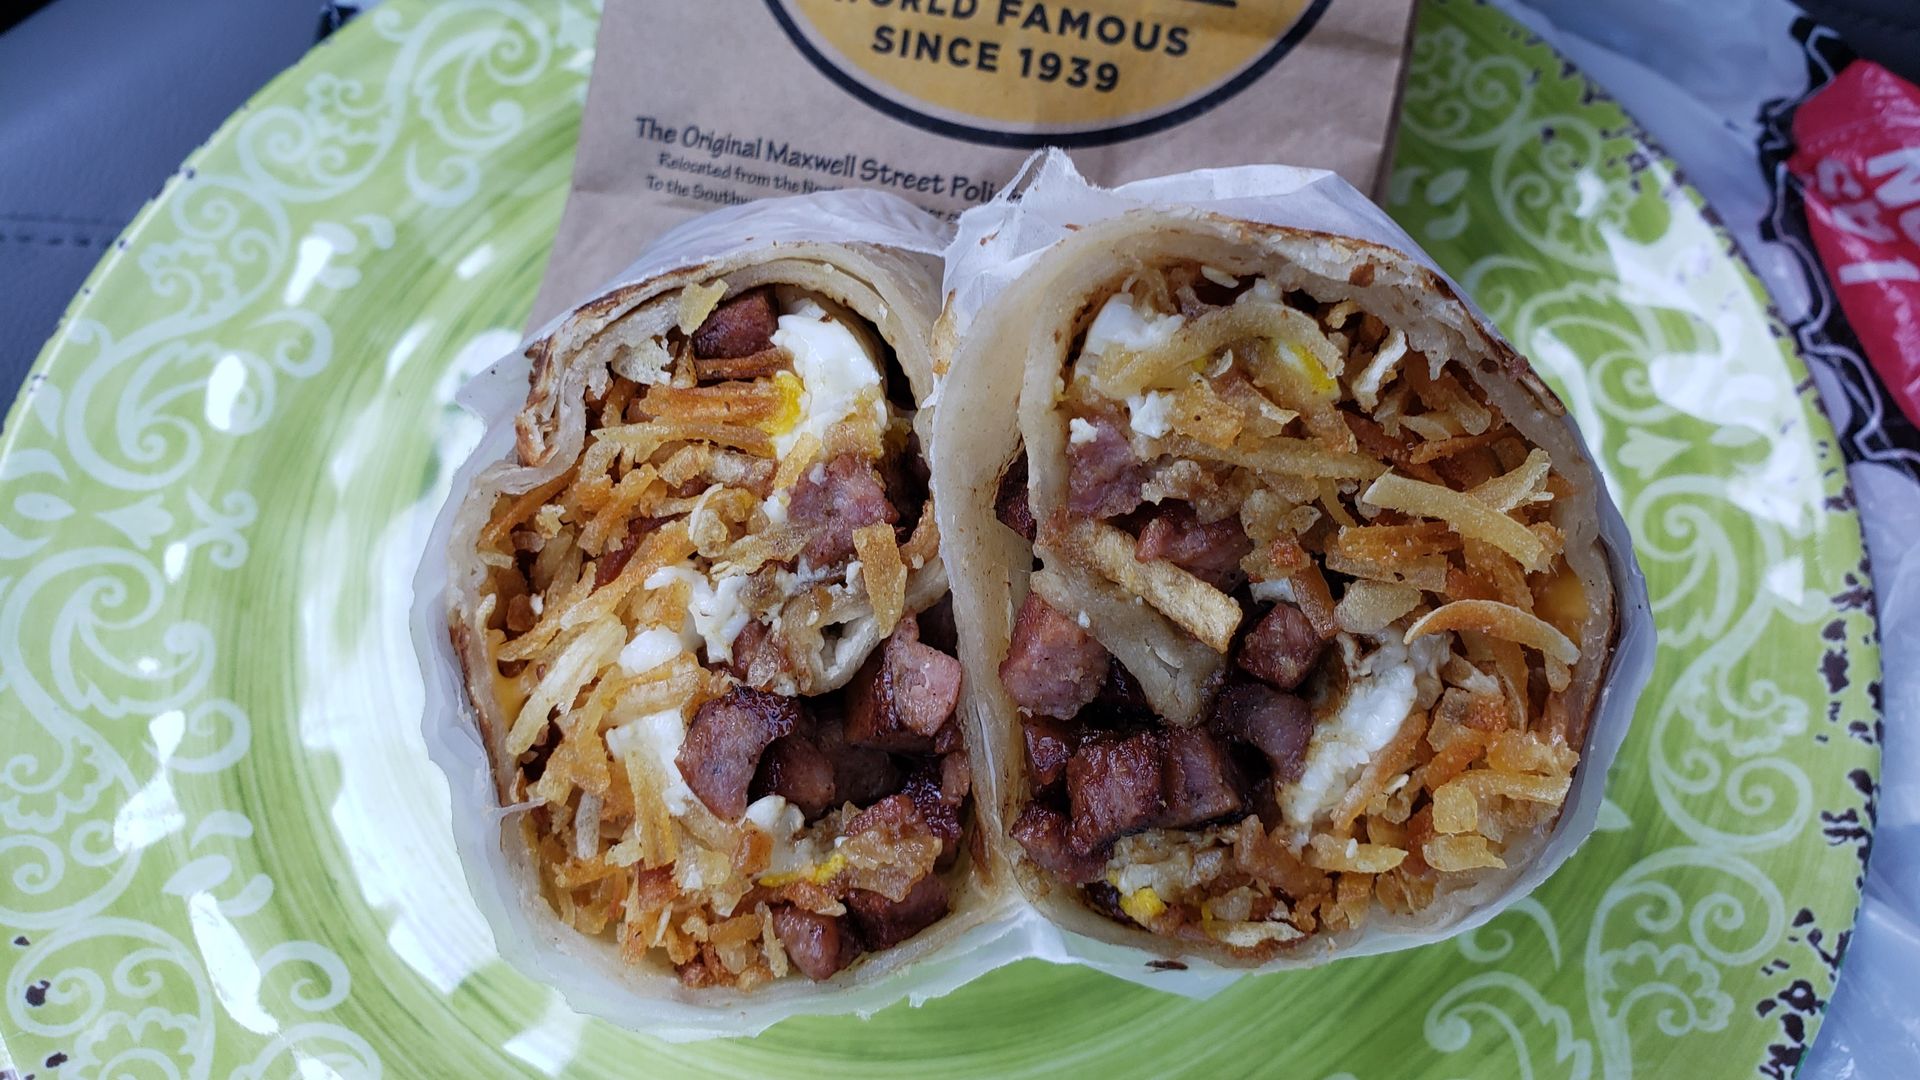 Inside of a burrito with hash browns, sausage, eggs and on a green plate.